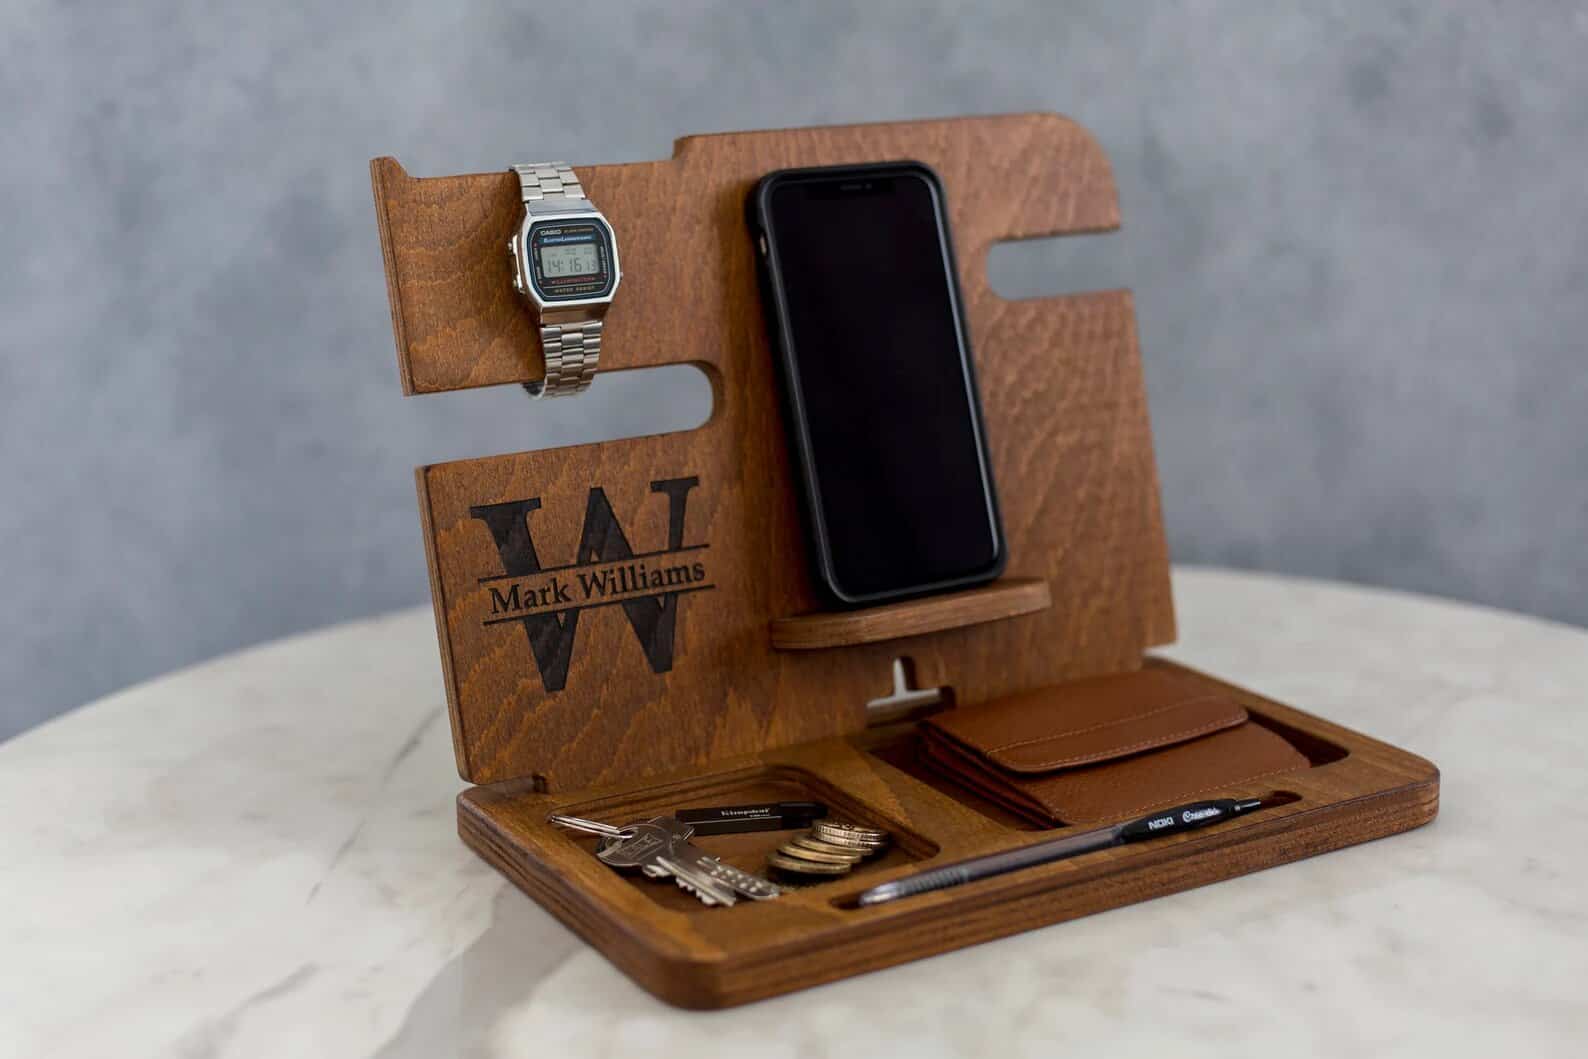 Father's Day gift idea for brother: Customizable Docking Station
